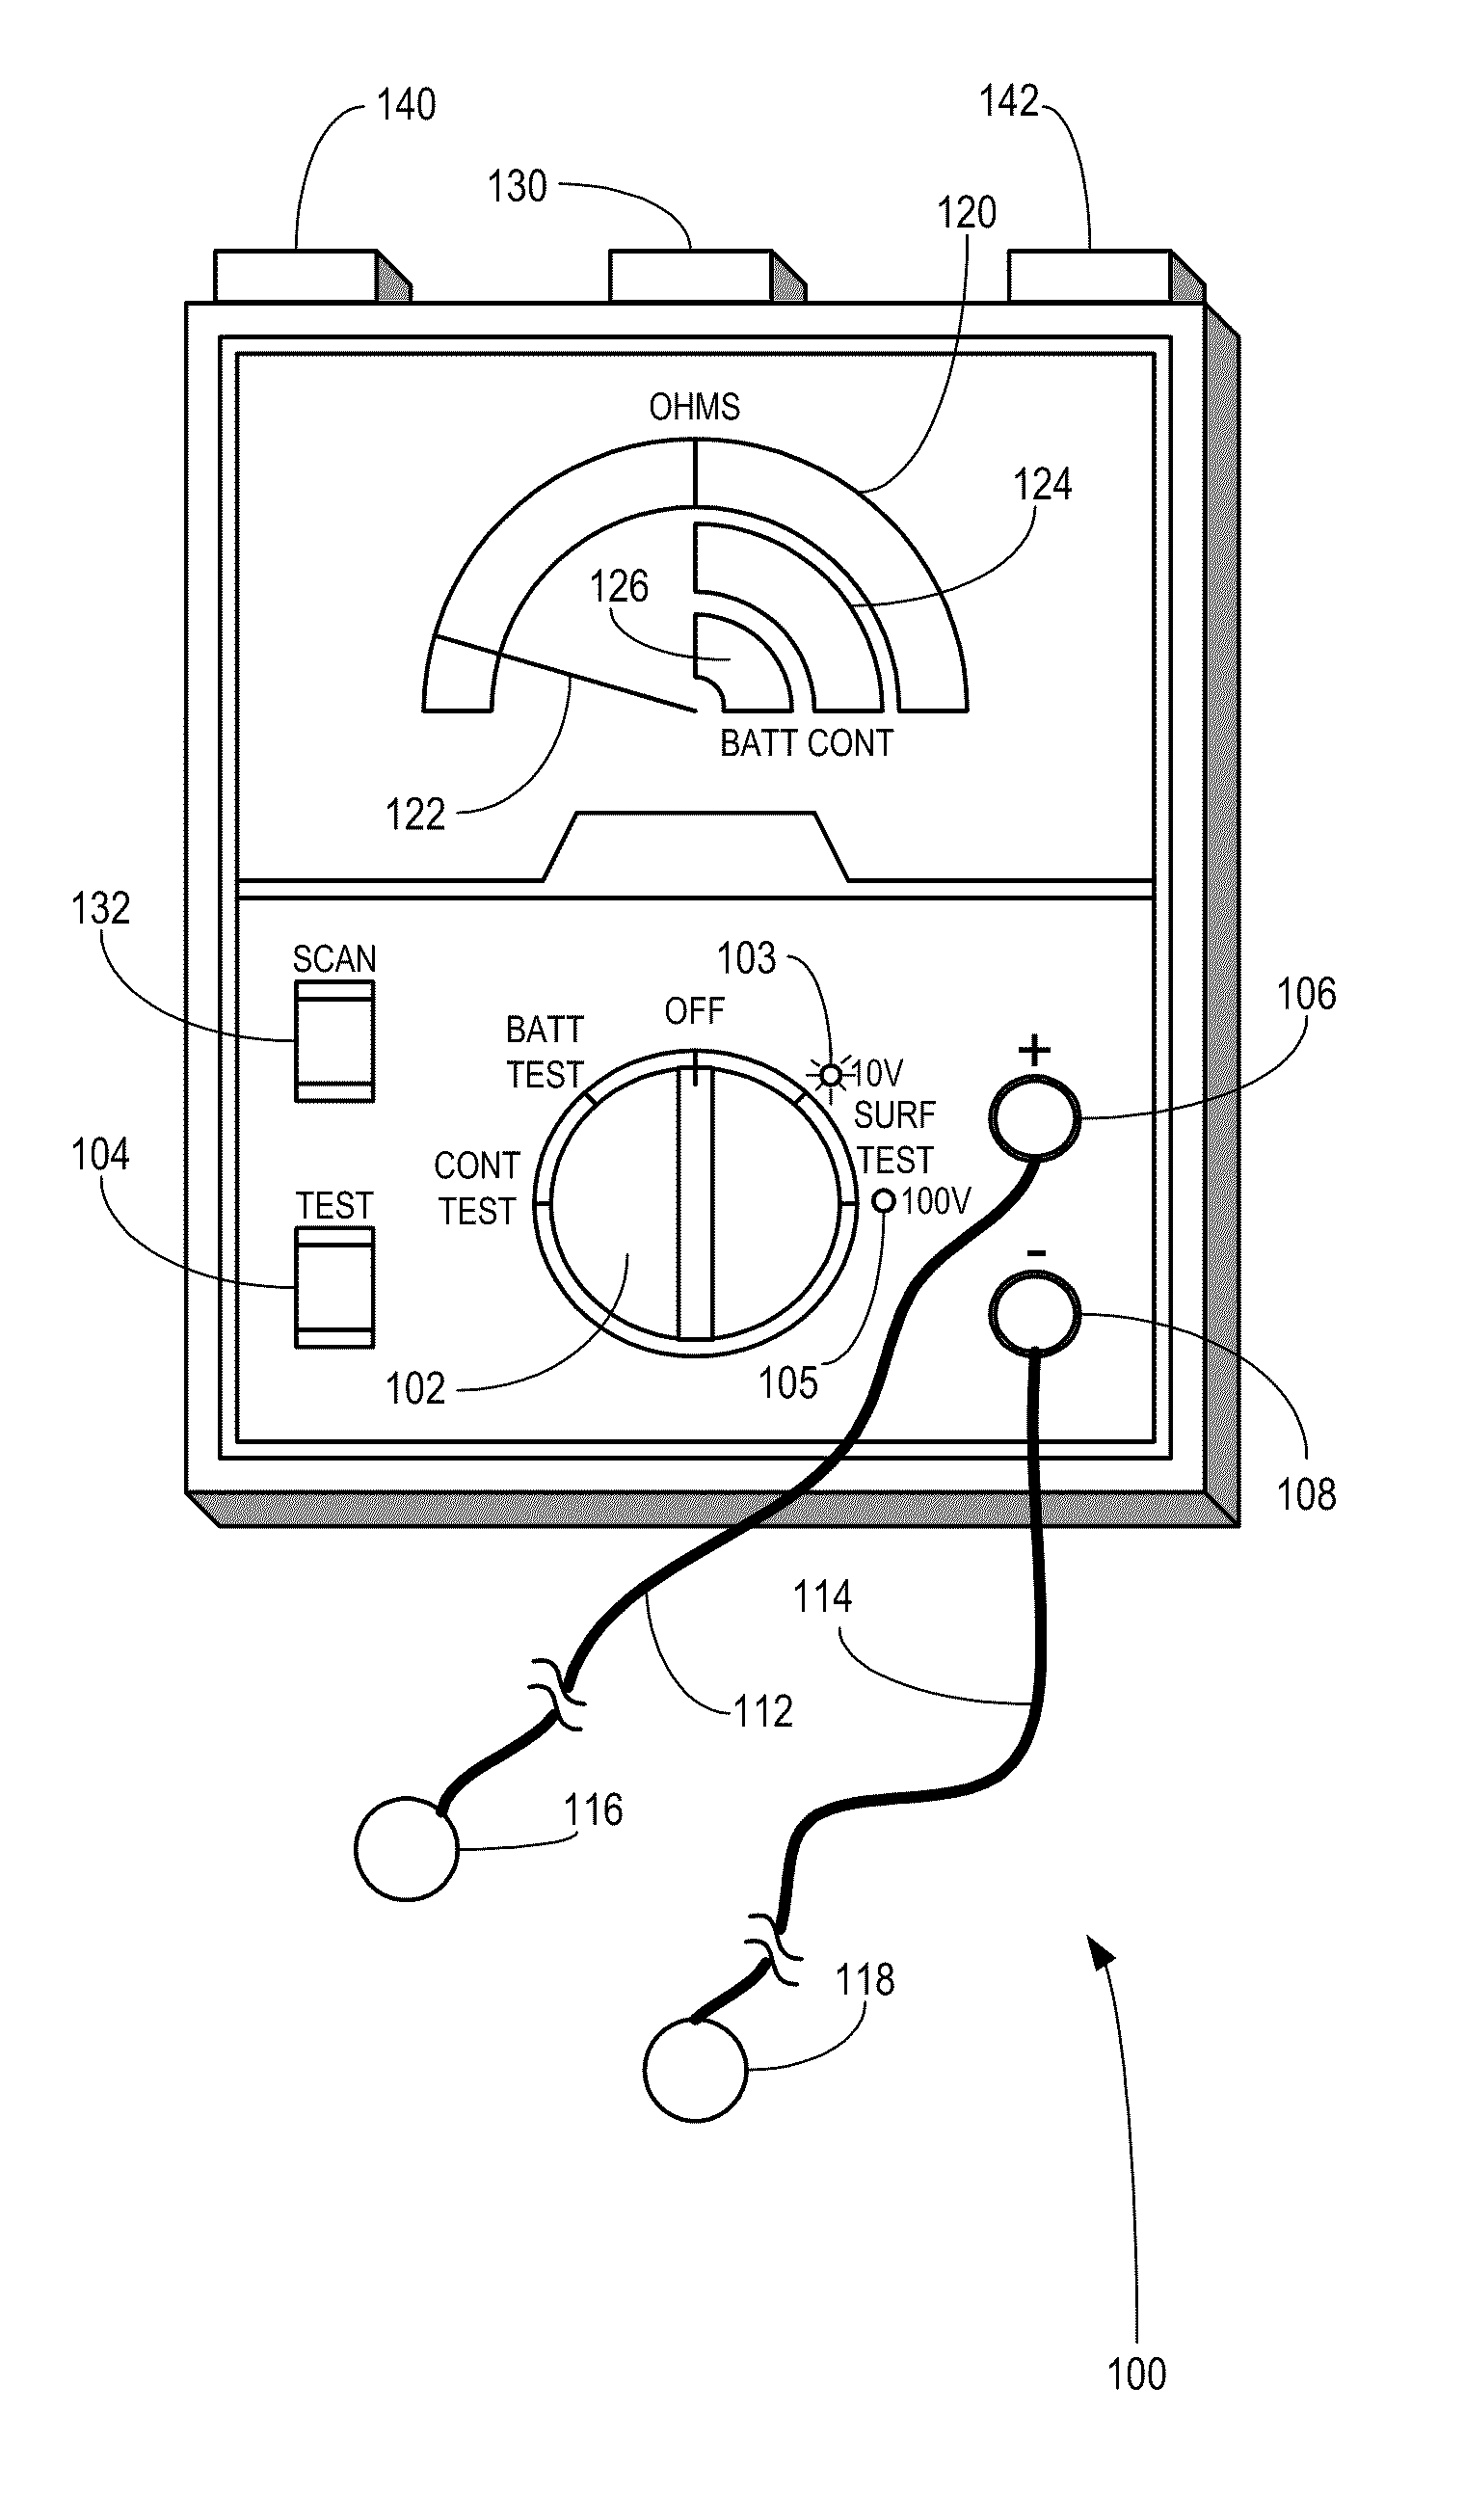 Electrostatic discharge device testing system and method